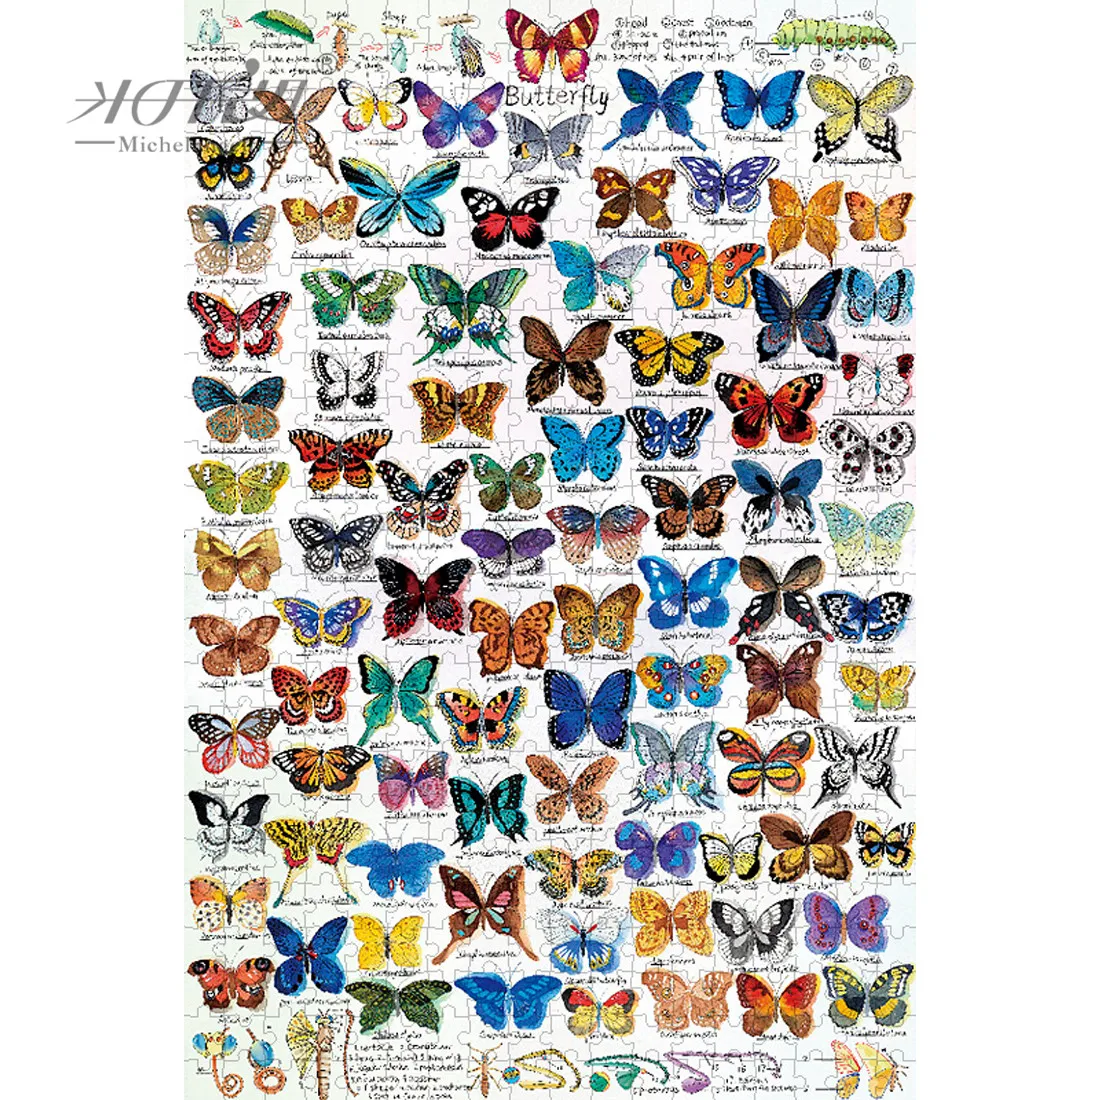 Michelangelo Wooden Jigsaw Puzzle 500 1000 1500 Piece Butterfly Map Cartoon Animal Kid Educational Toy Watercolor Painting Decor michelangelo